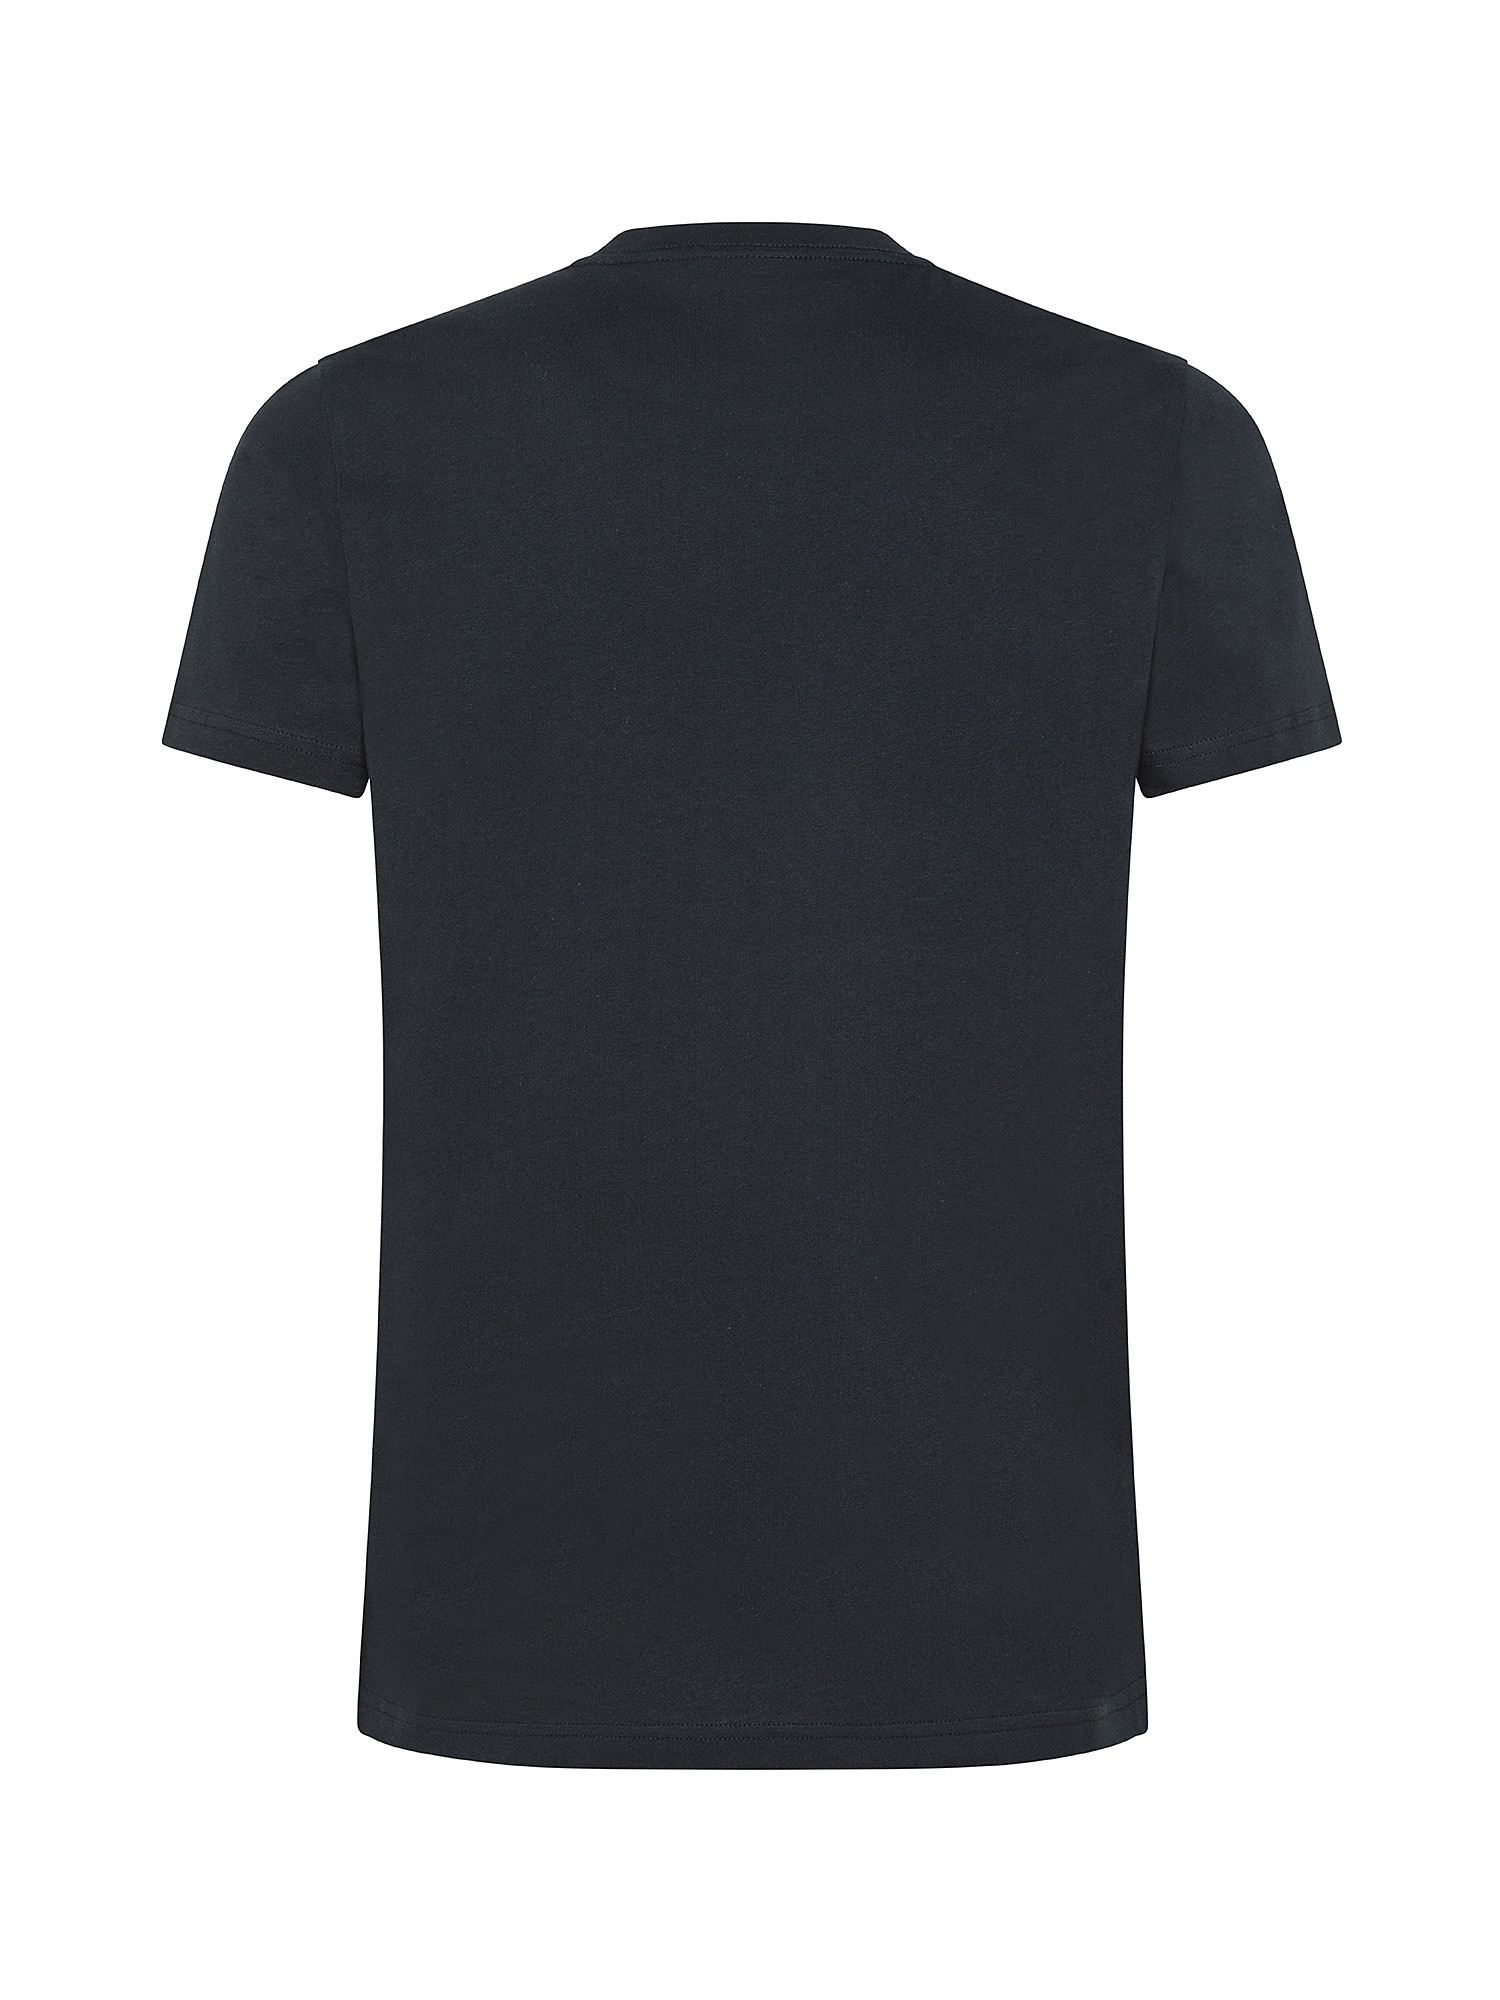 Paul Smith - T-shirt in cotone slim fit con stampa pennellate, Blu scuro, large image number 1